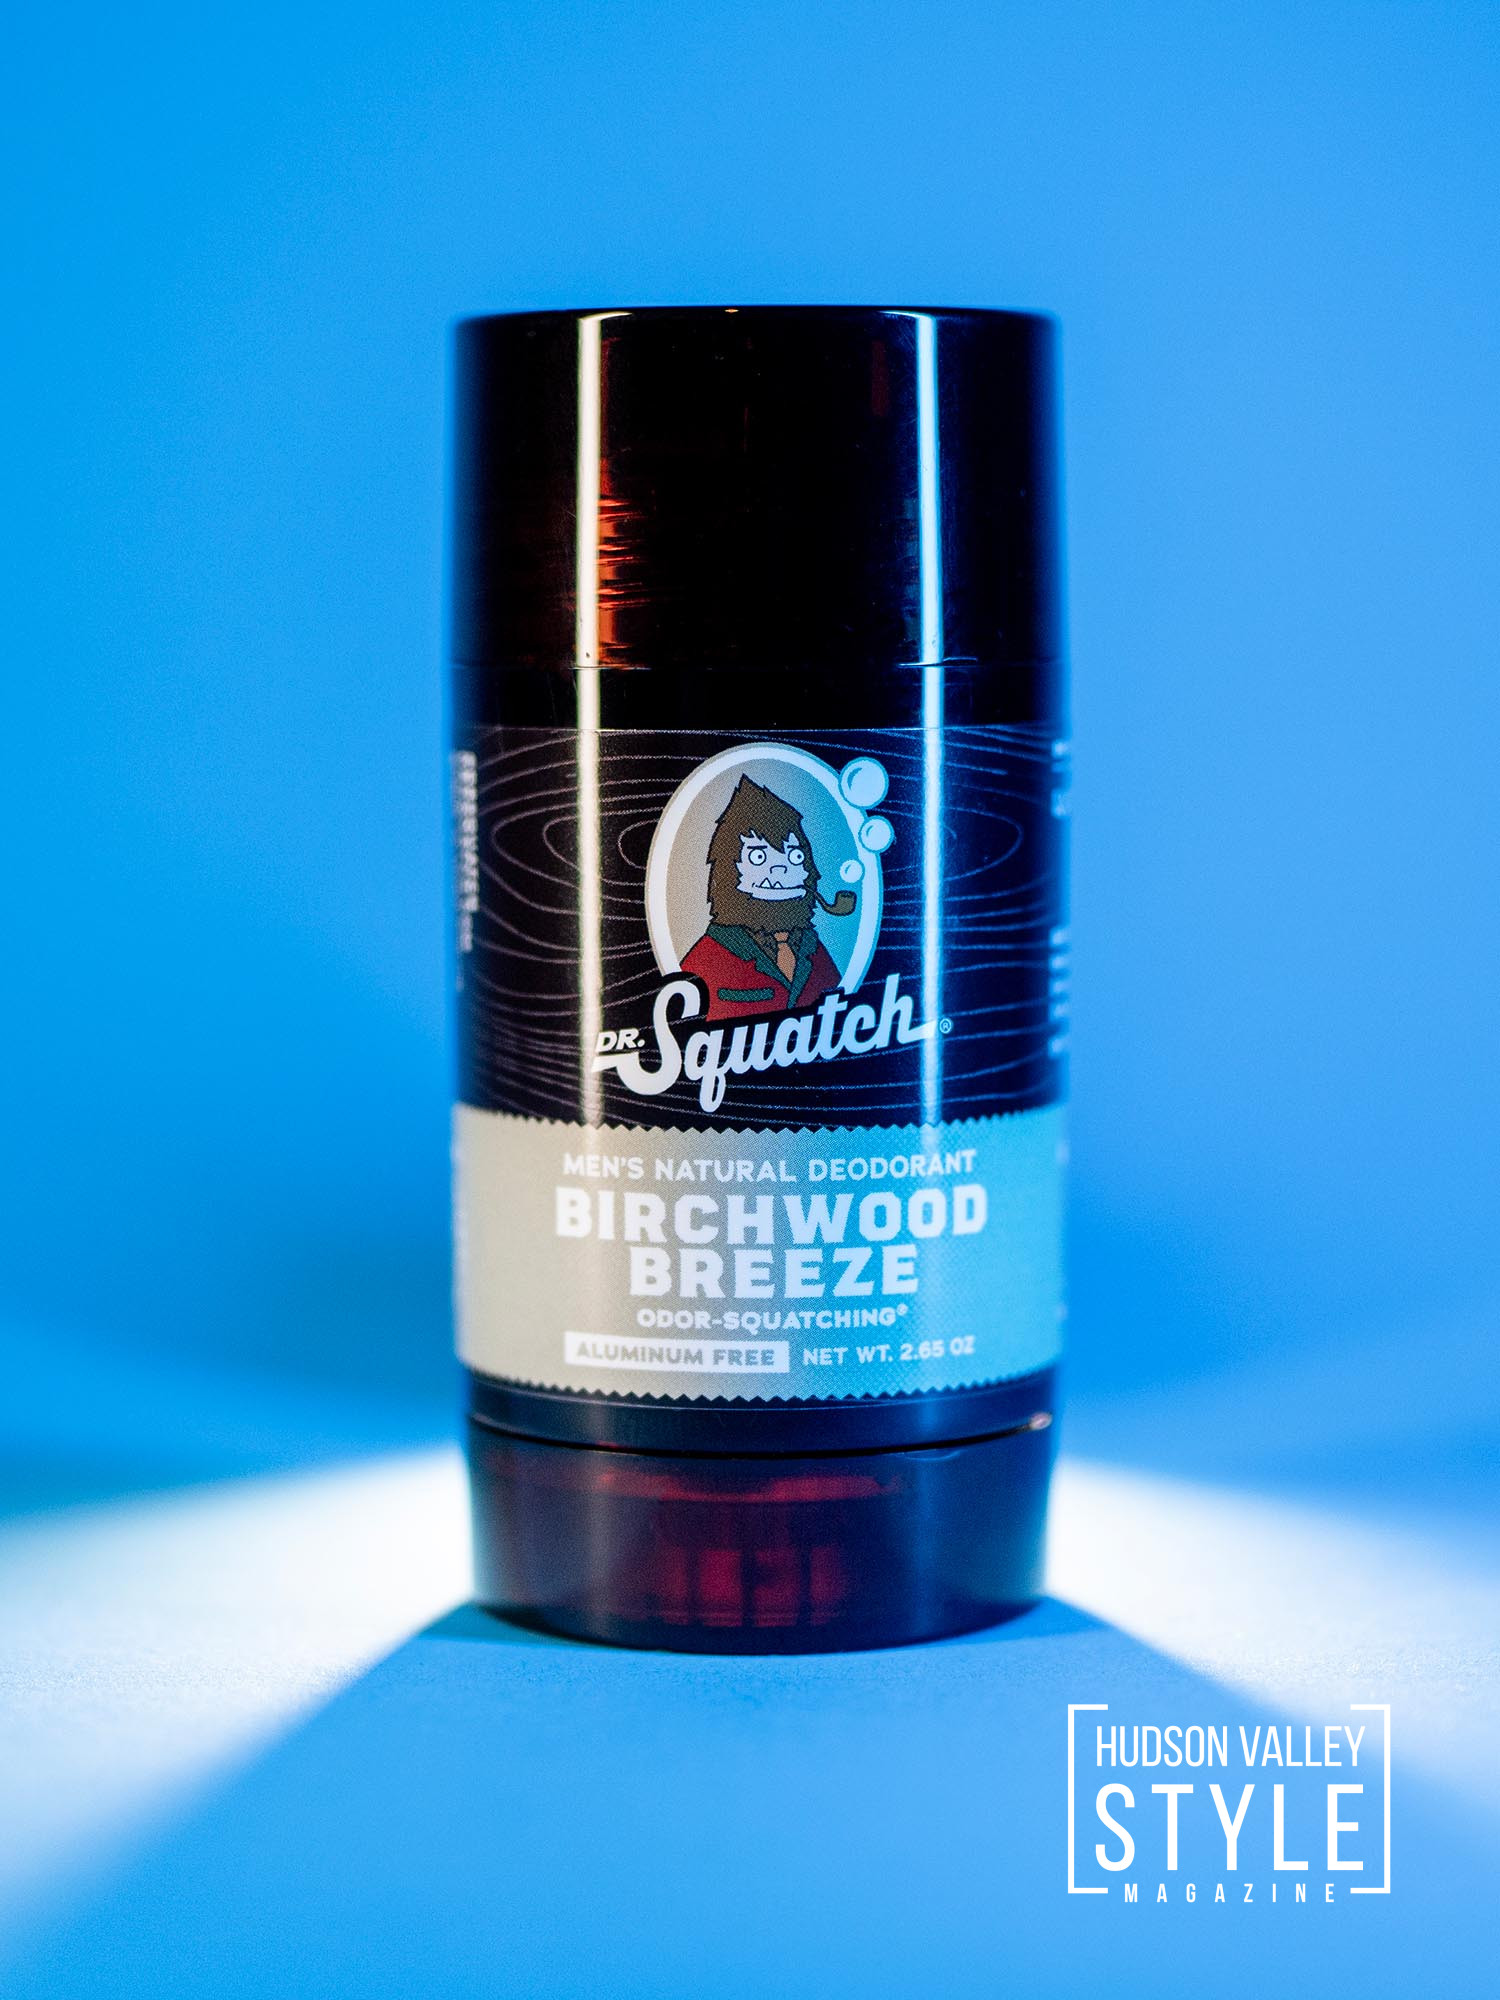 The Mindful Man’s Armor: Dr. Squatch's Natural Deodorant for Natural Bodybuilders – Product Reviews with Bodybuilding Coach Maxwell Alexander